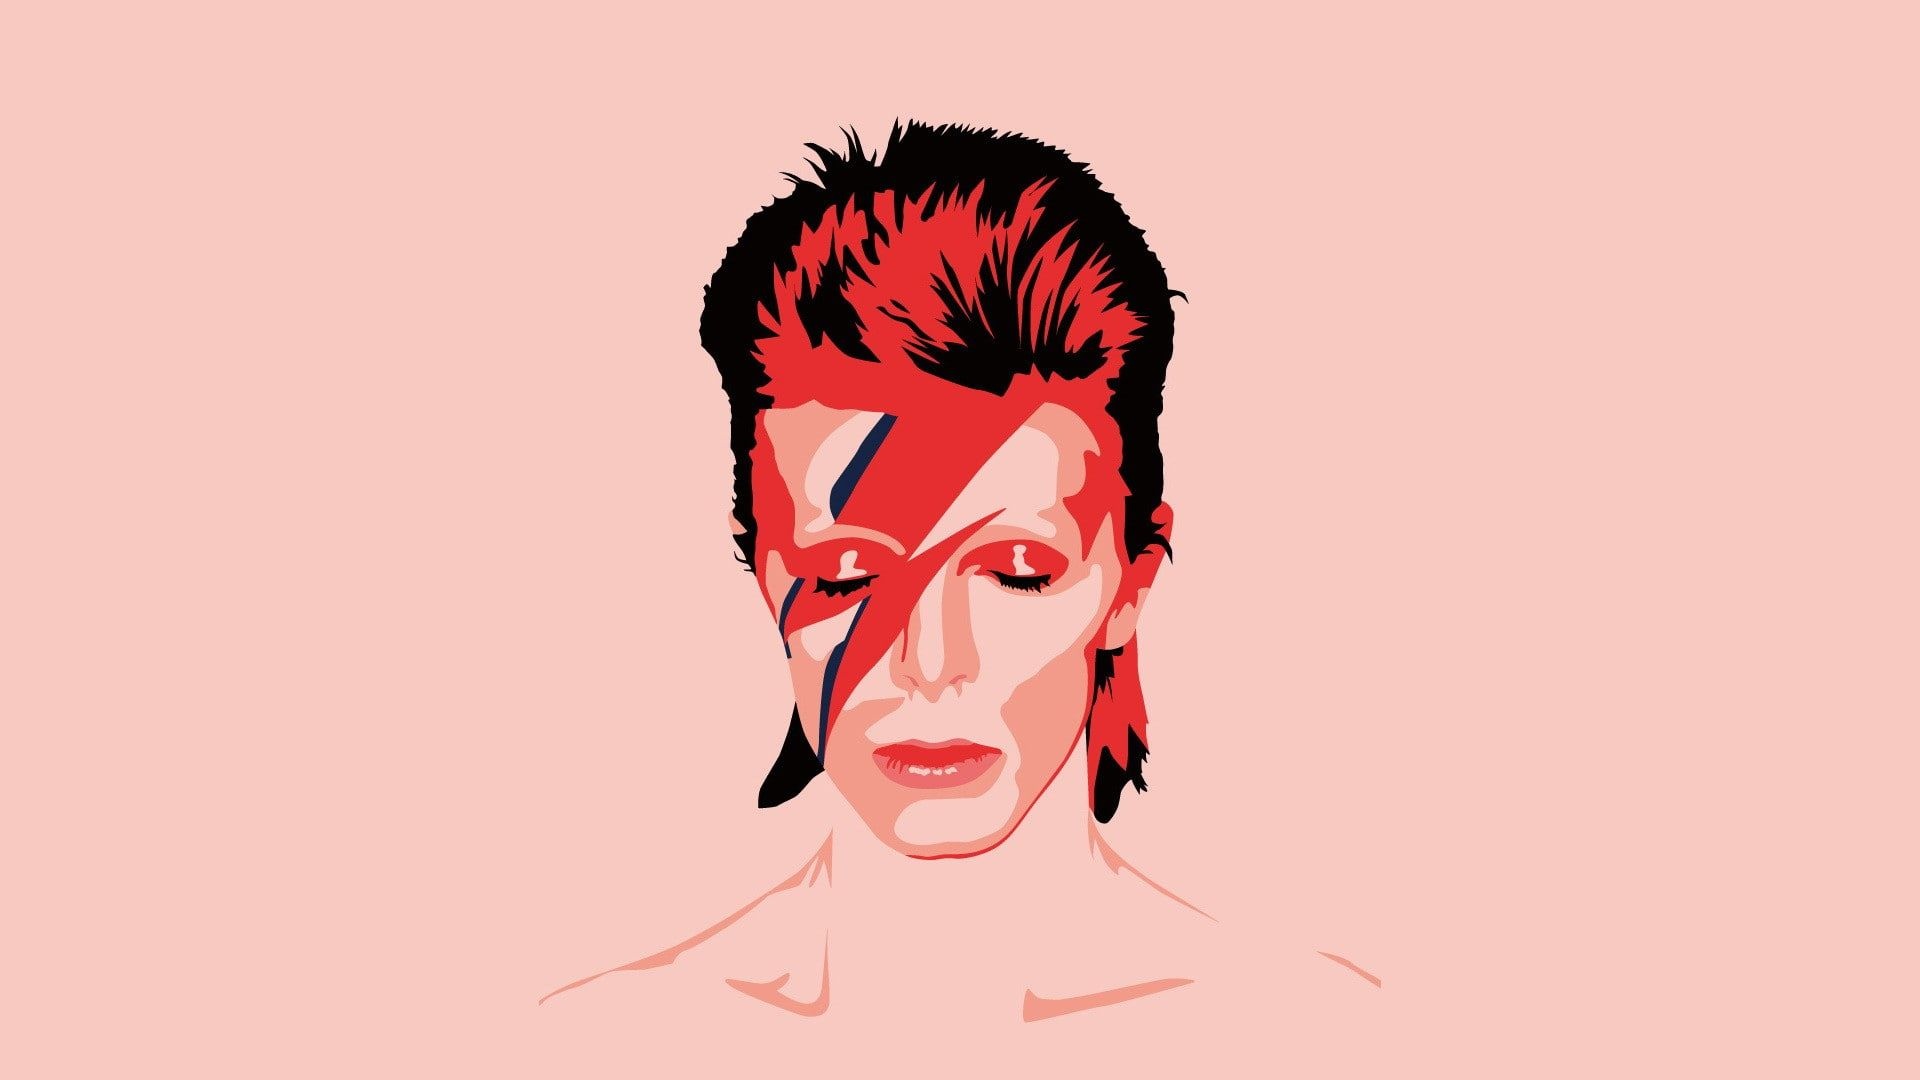 David Bowie: "Space Oddity" was first released on 11 July 1969, Ziggy Stardust. 1920x1080 Full HD Background.